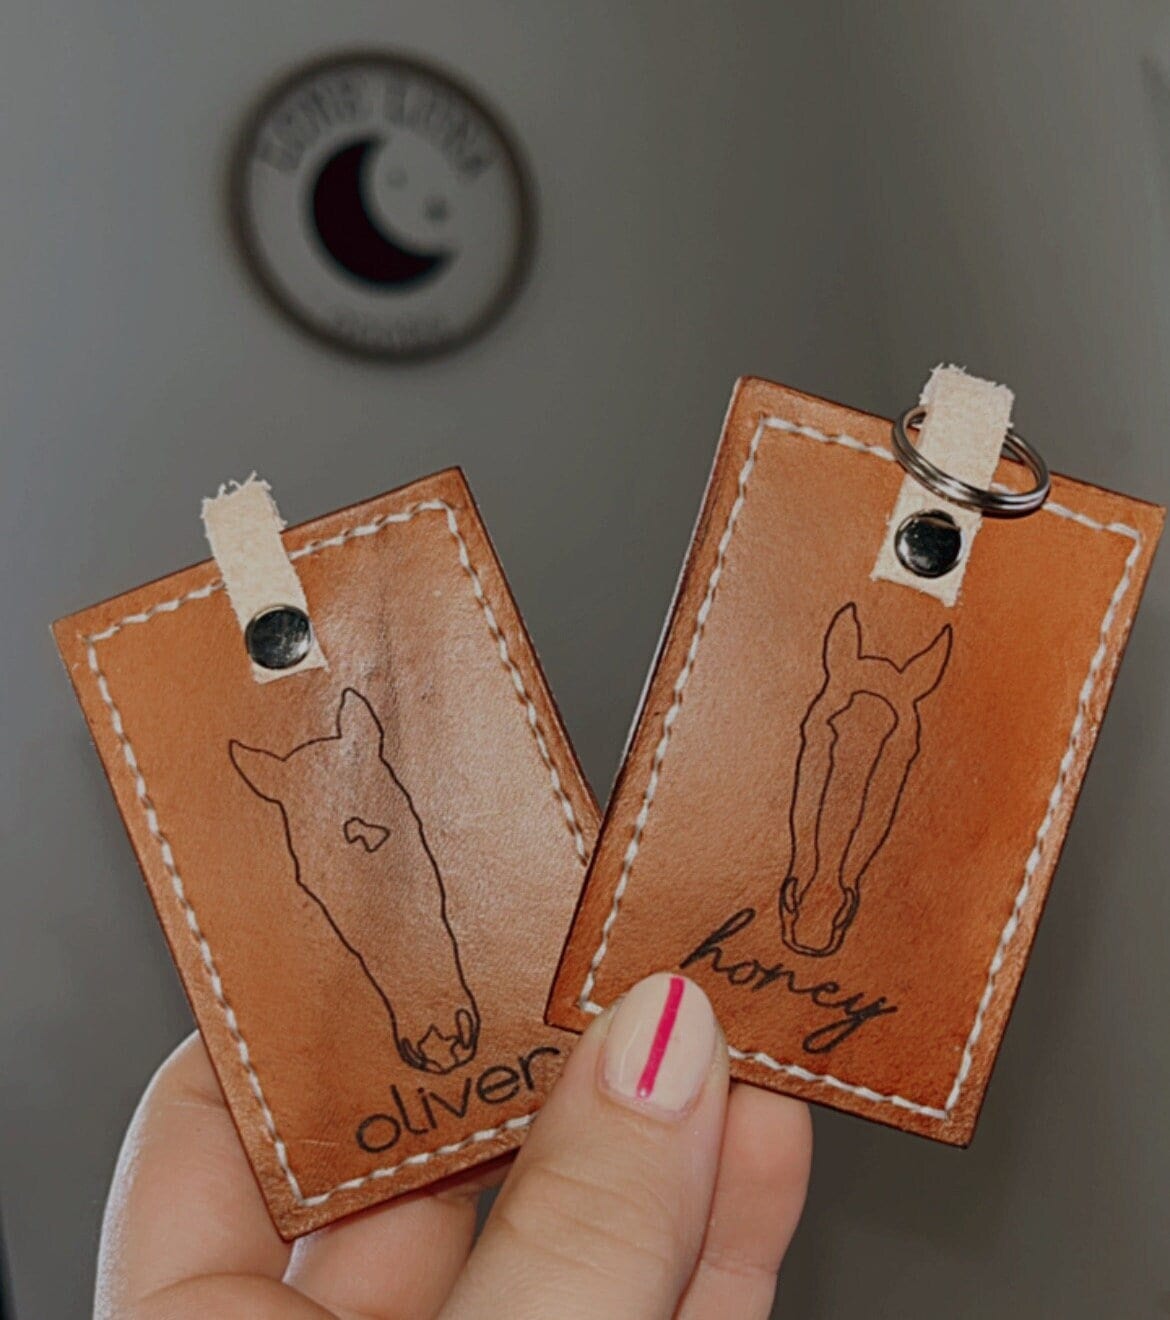 Custom Mail In Horse Hair Leather Key Chain – Hoofbeat Designs Leather Co.